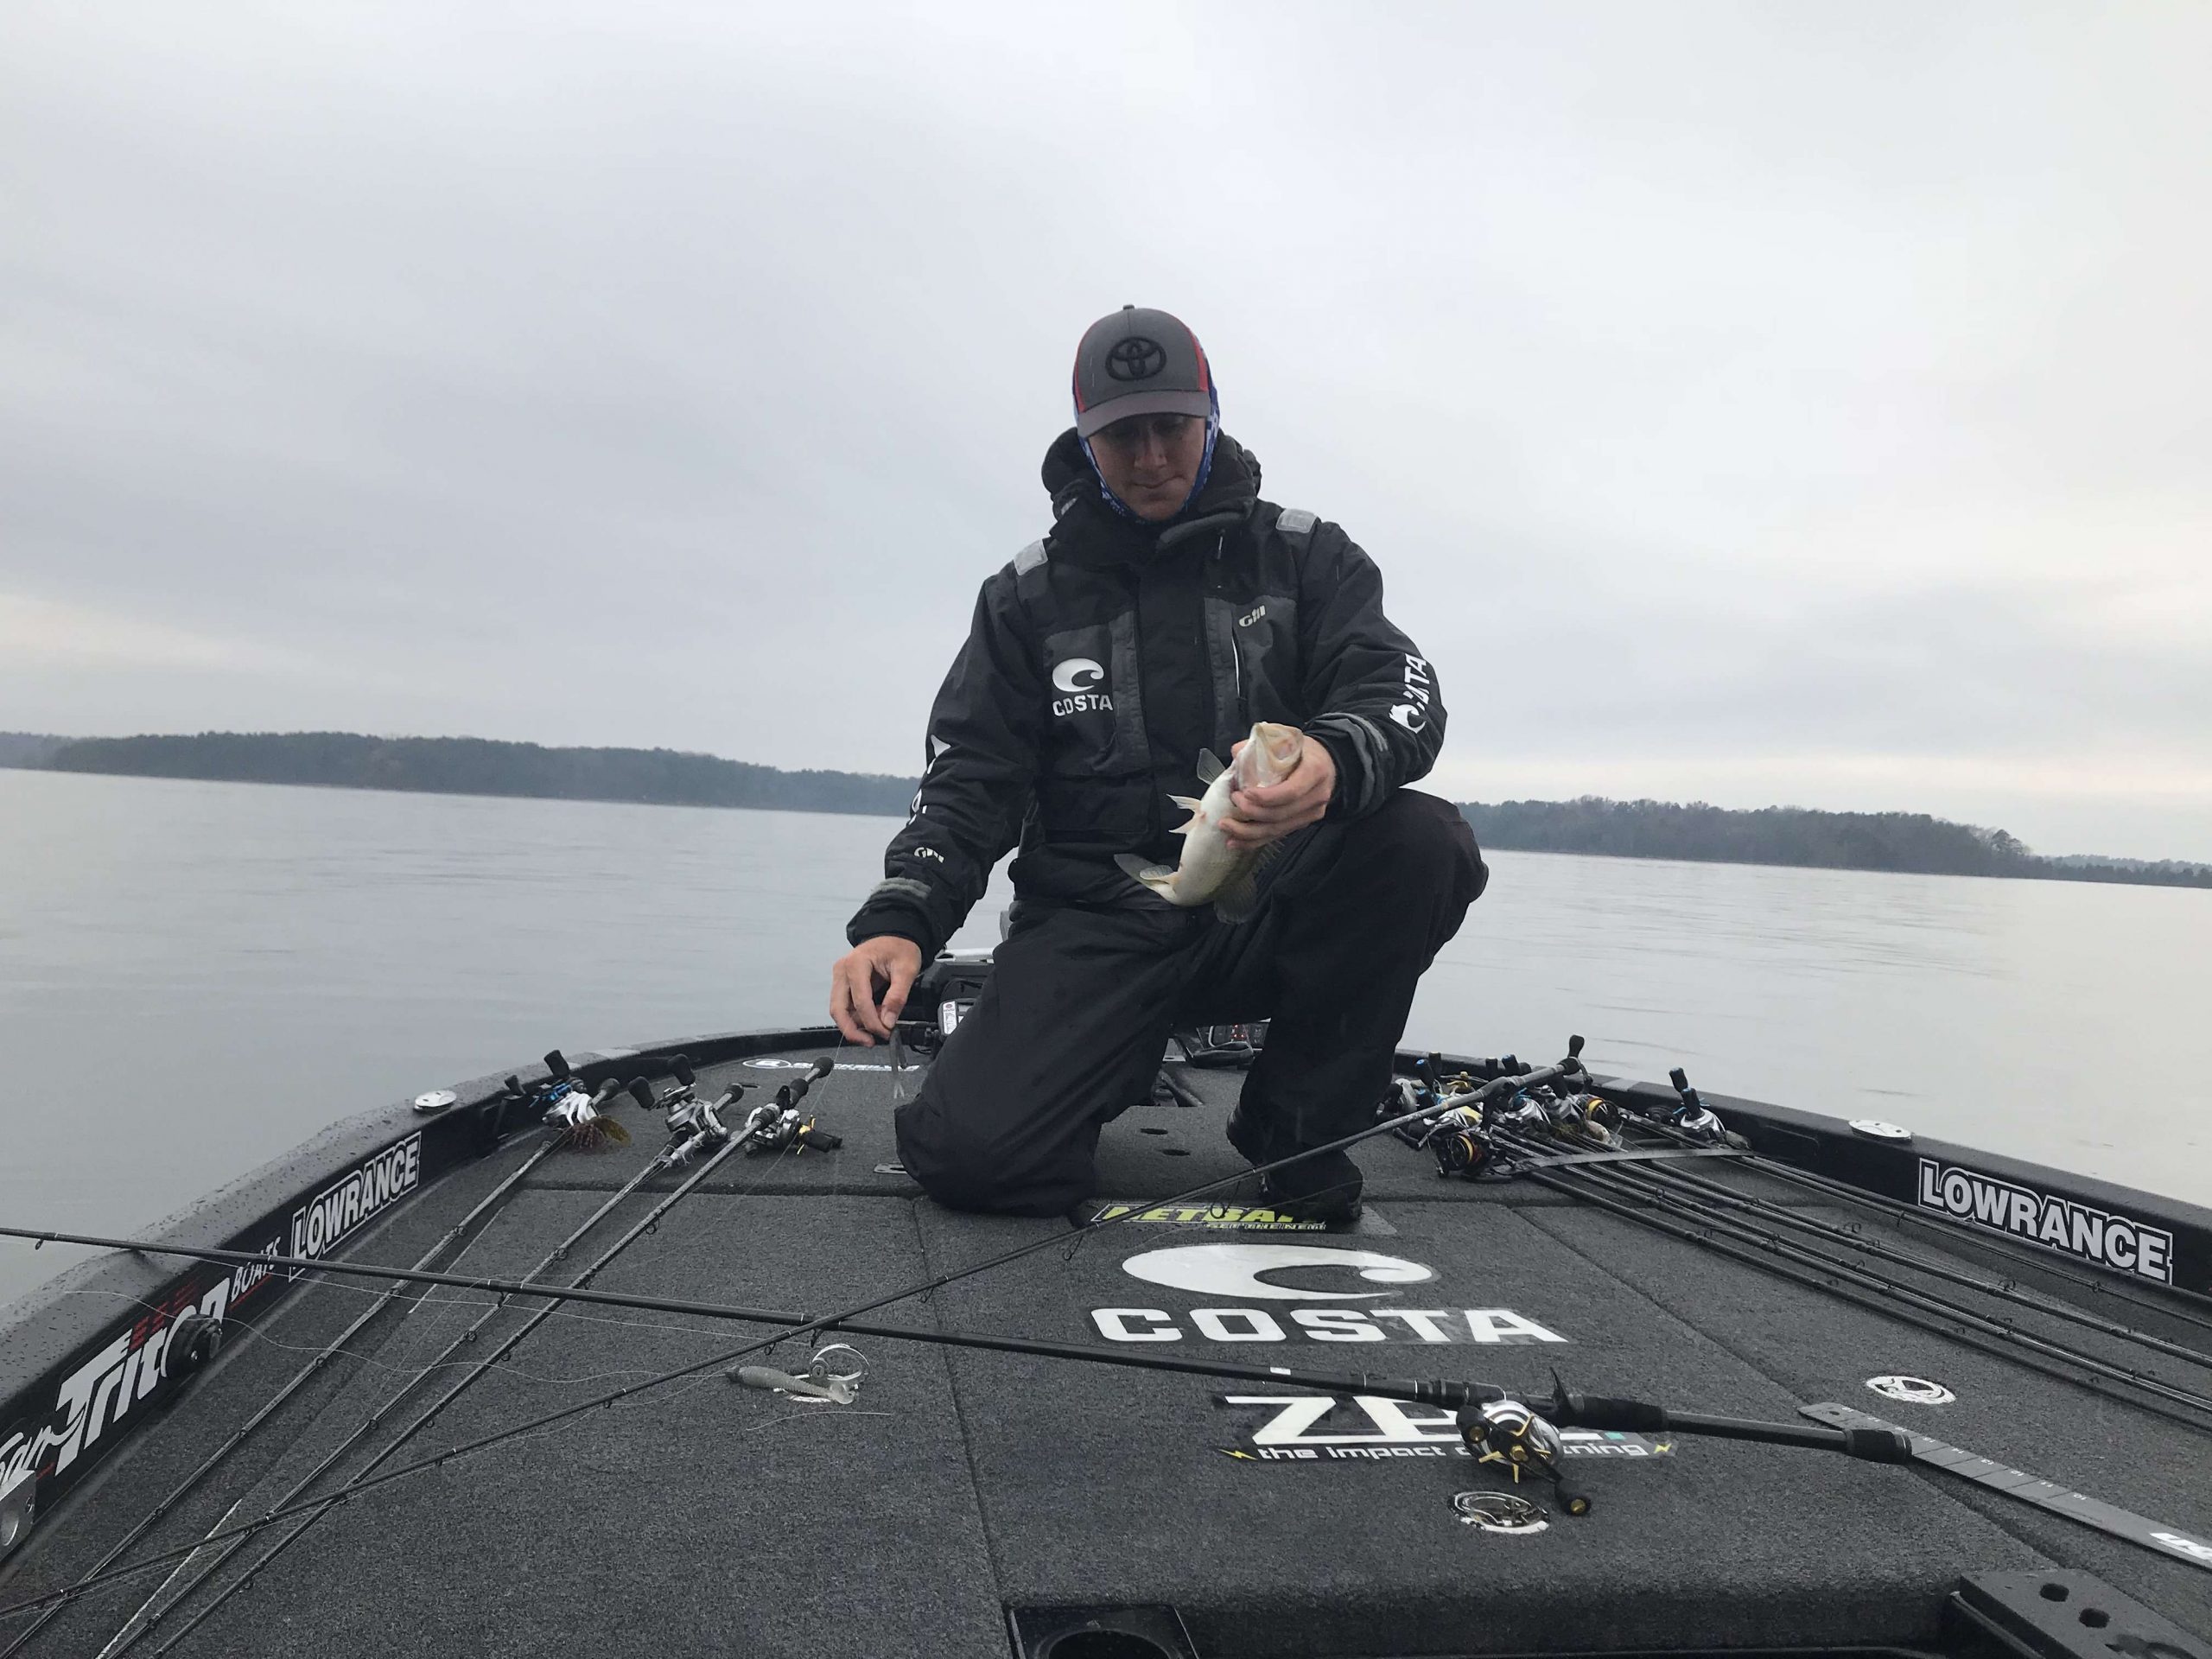 Dustin's fourth in the boatâ1.5 pound spotted bass